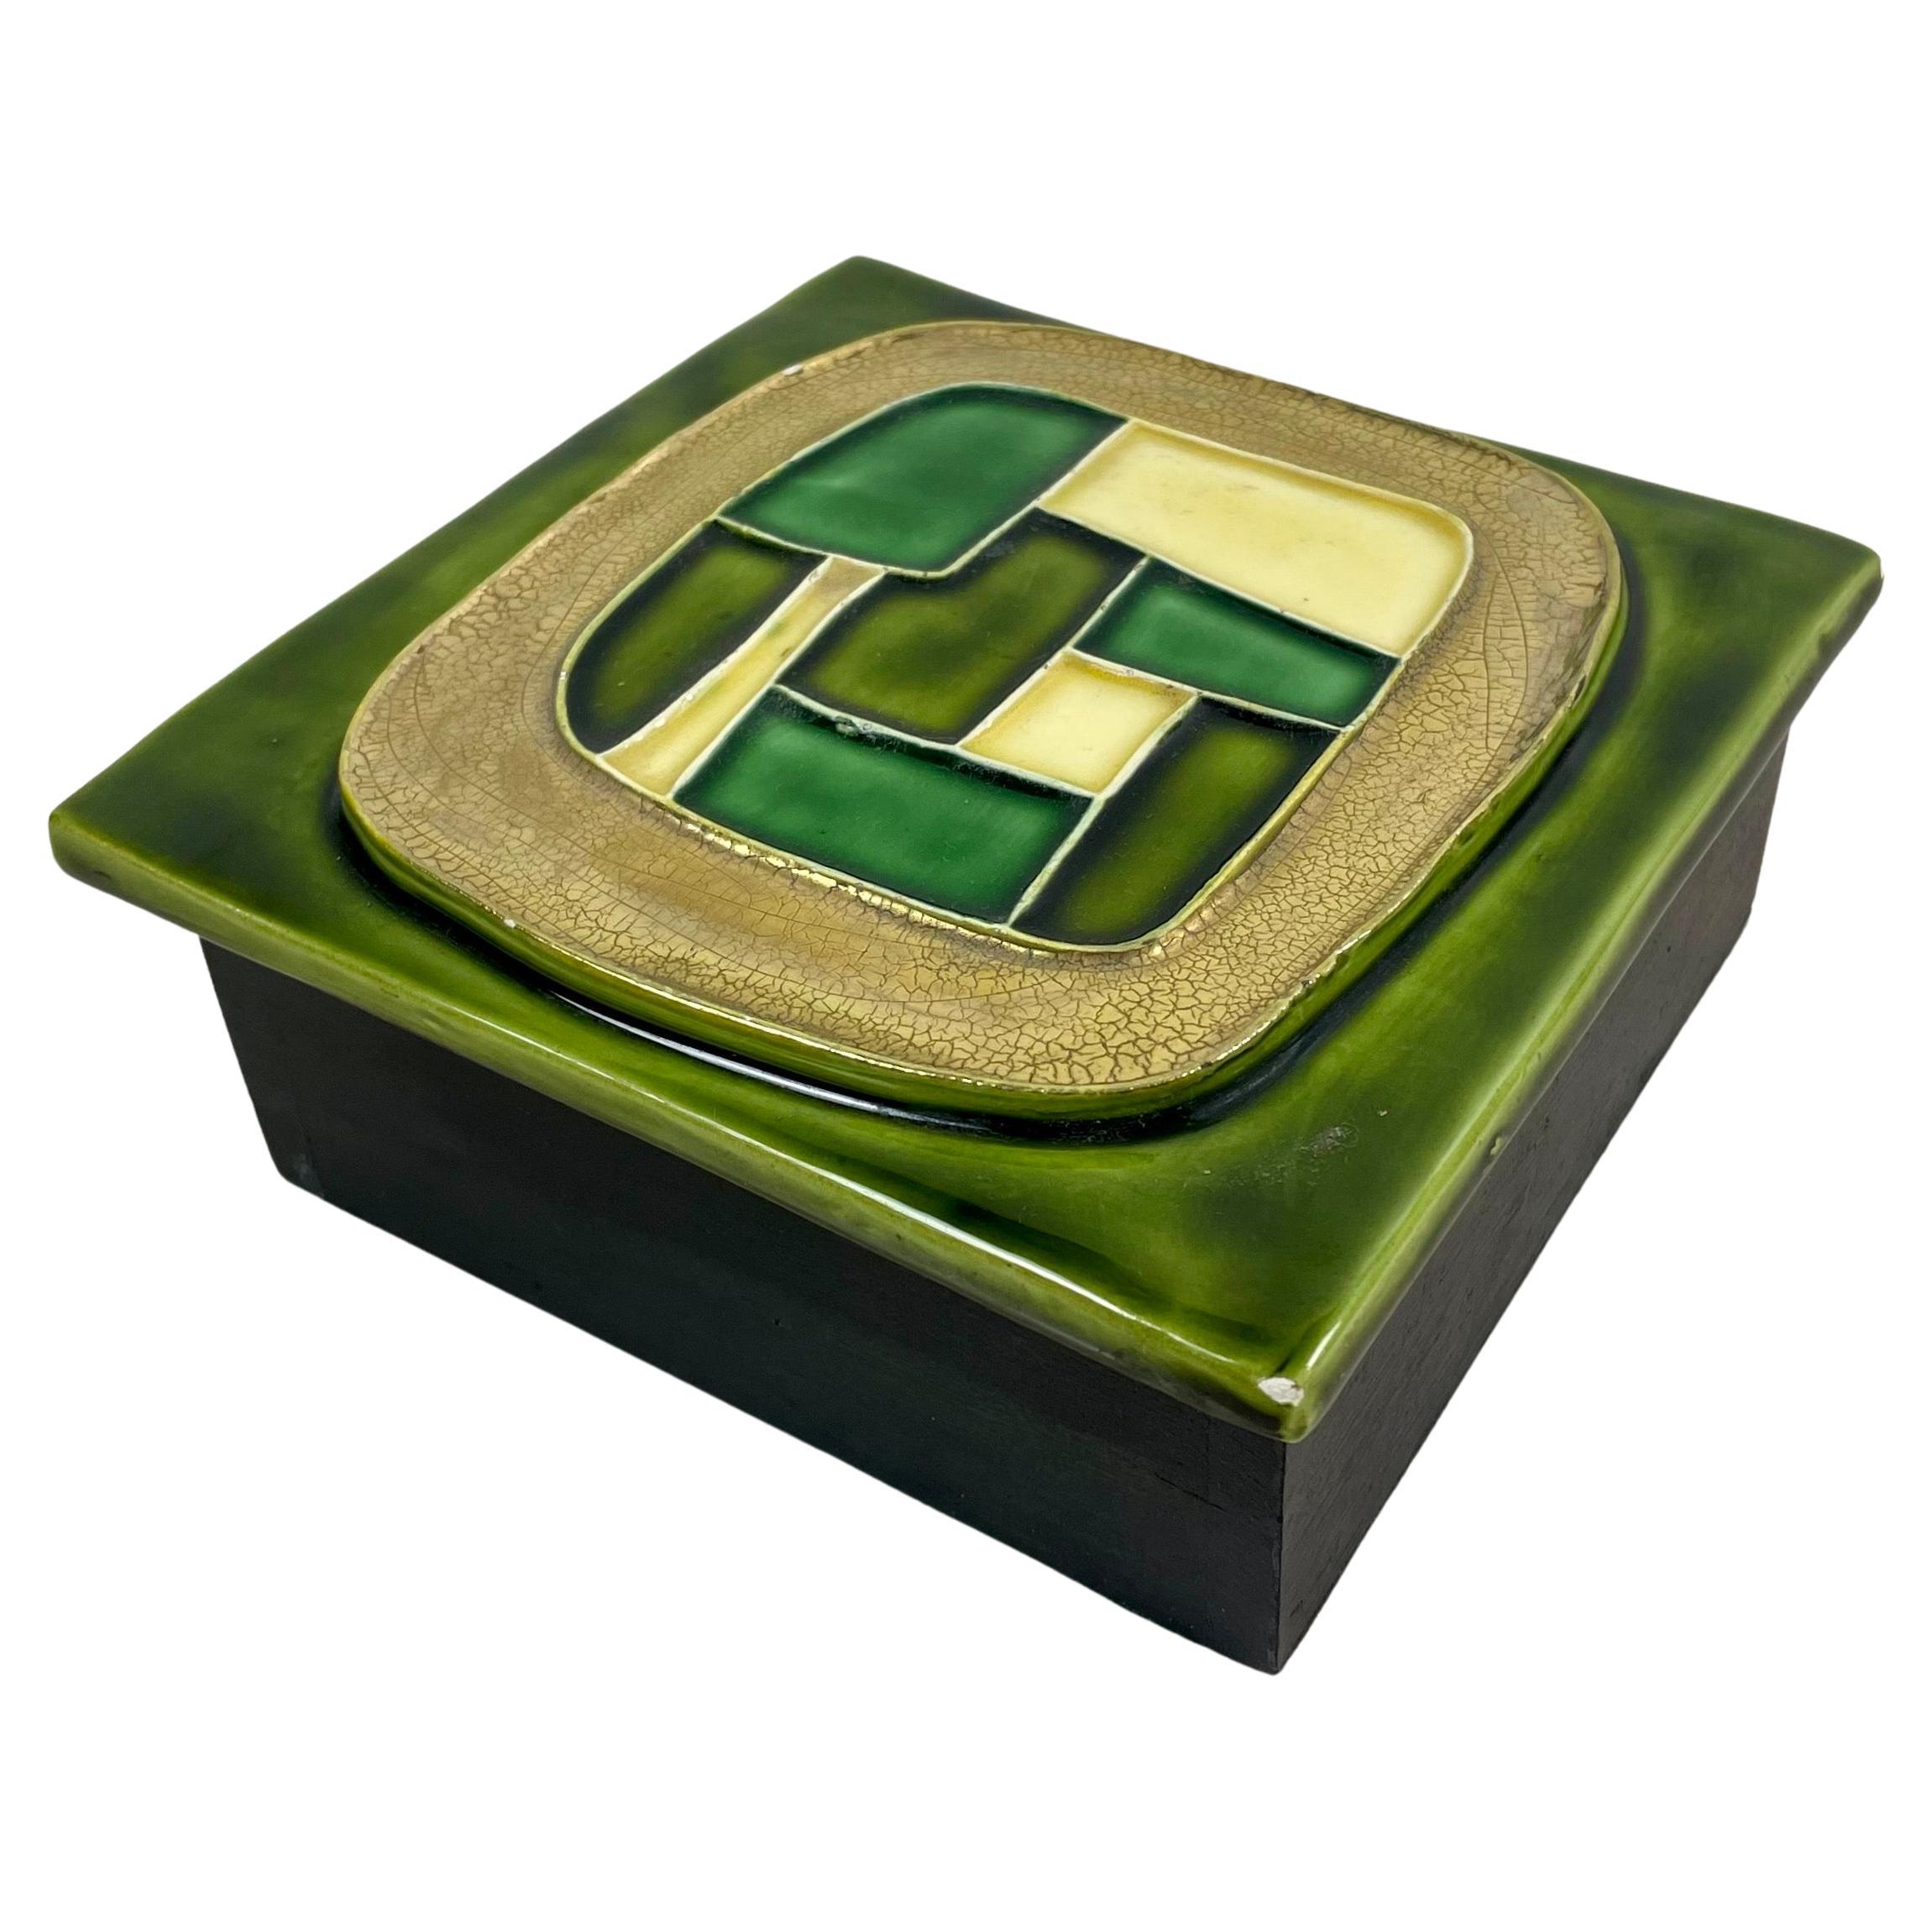 Secret box, jewelry box, storage box, tidy rectangular with glazed ceramic lid in shades of green and wooden base, by Mithé Espelt.
The box is decorated with geometric shapes. This box gives a very decorative and visual result. The ceramic work is